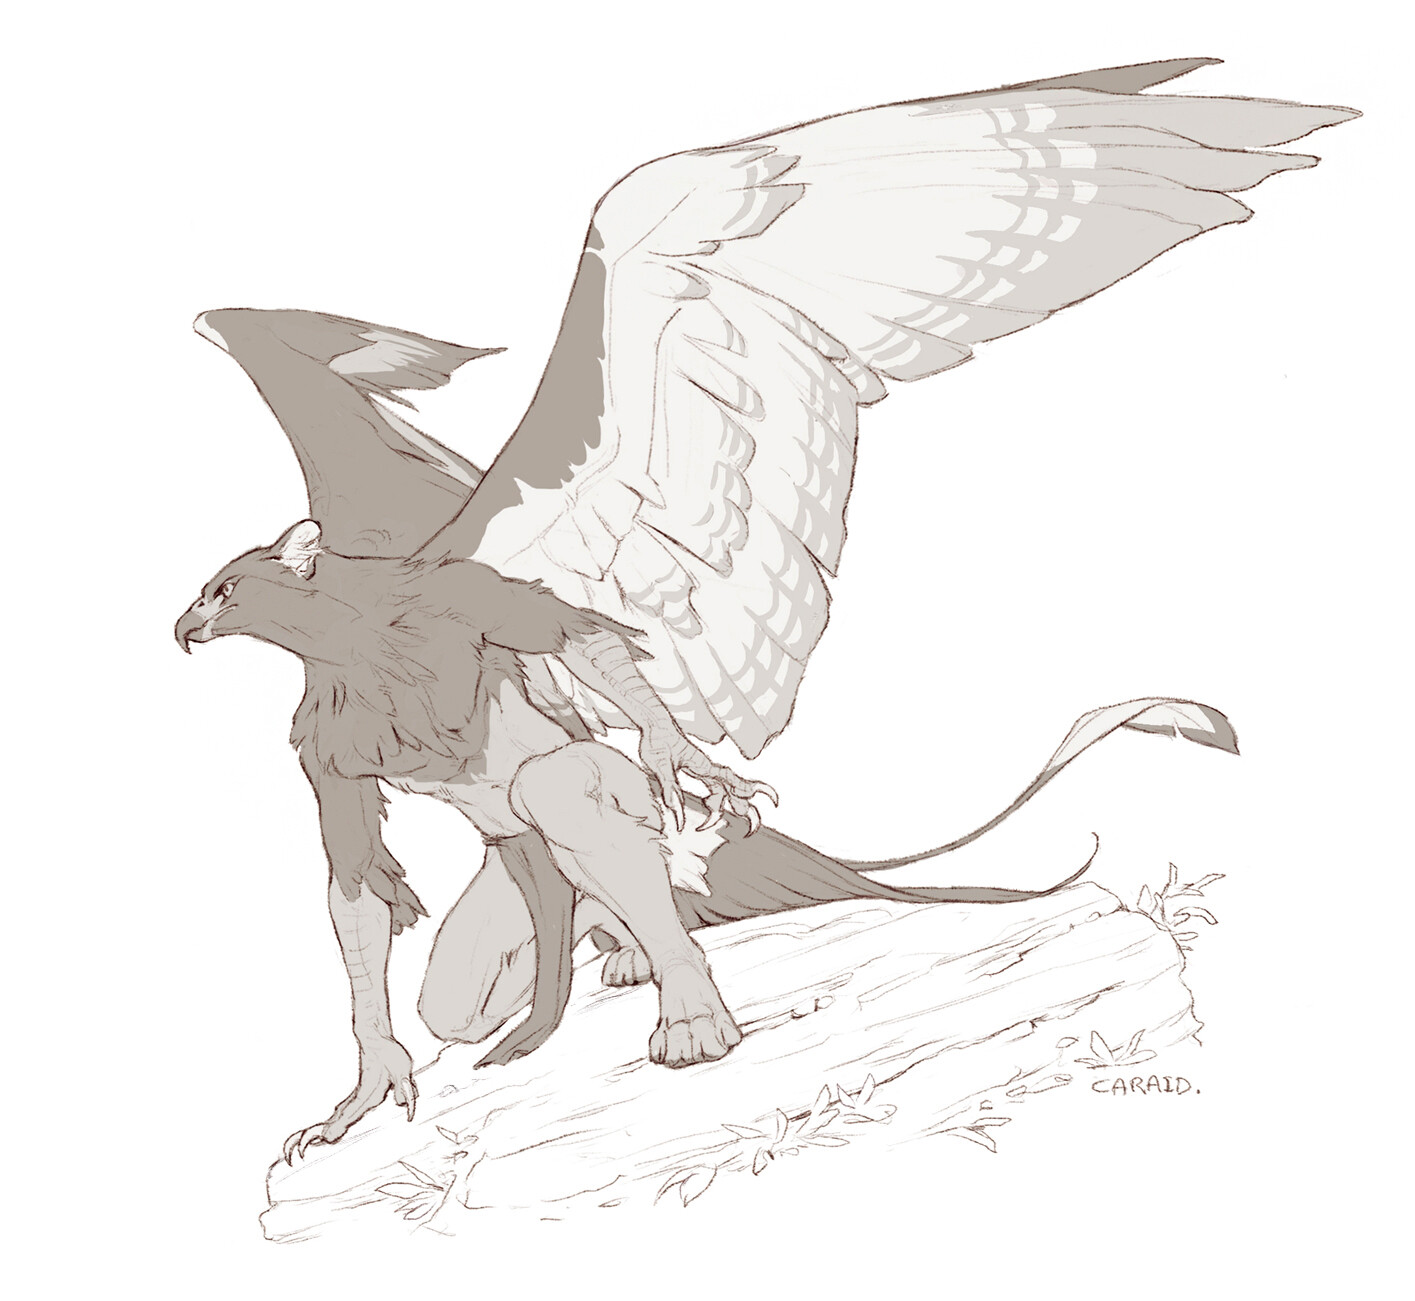 Day 7: Gryphon